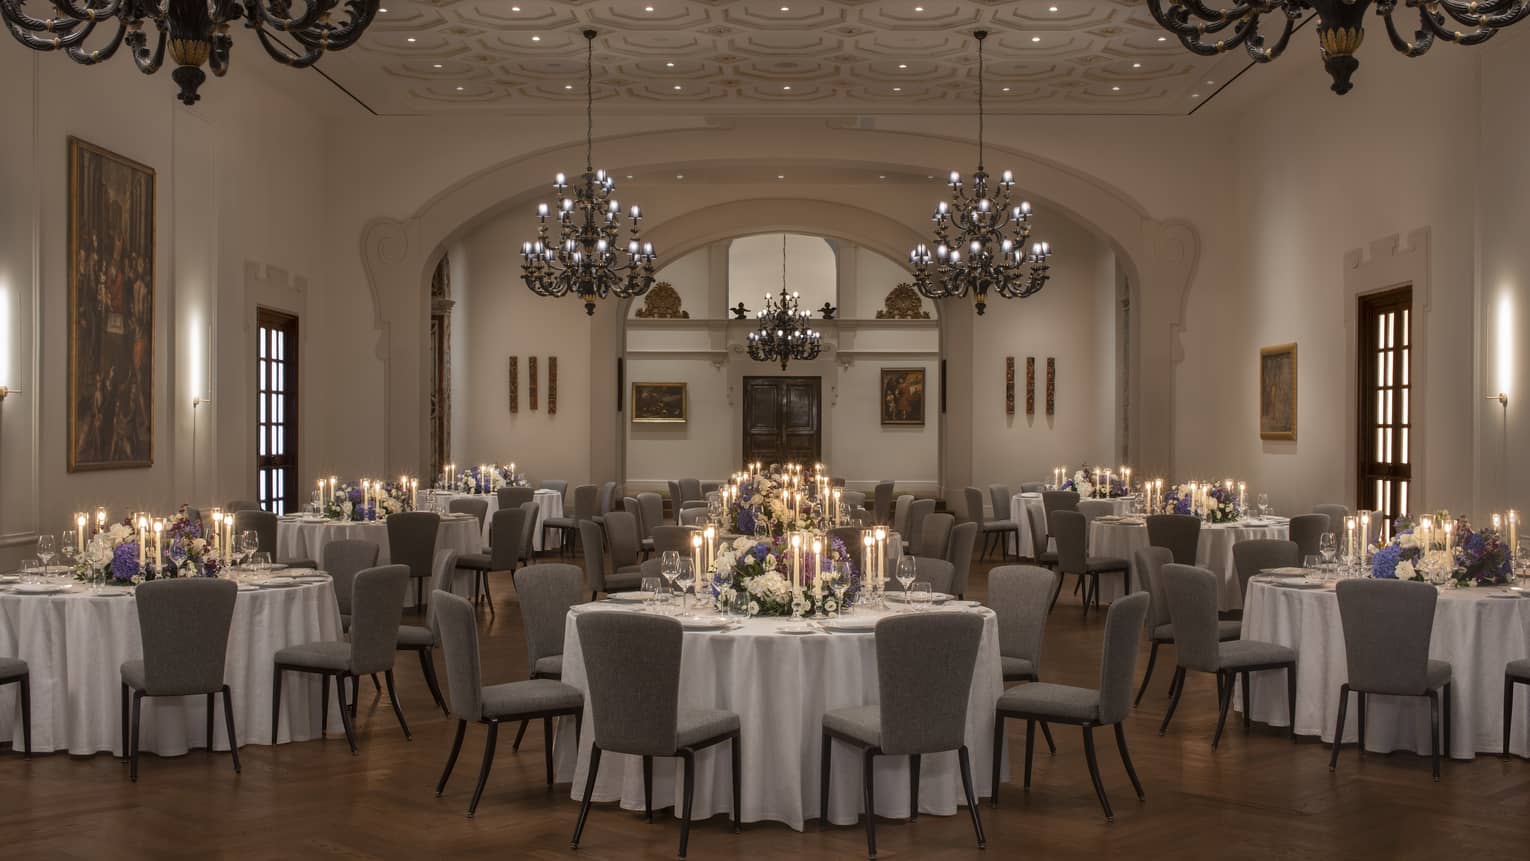 Grand Chiesa Ballroom elegantly set with round clothed tables under large chandeliers